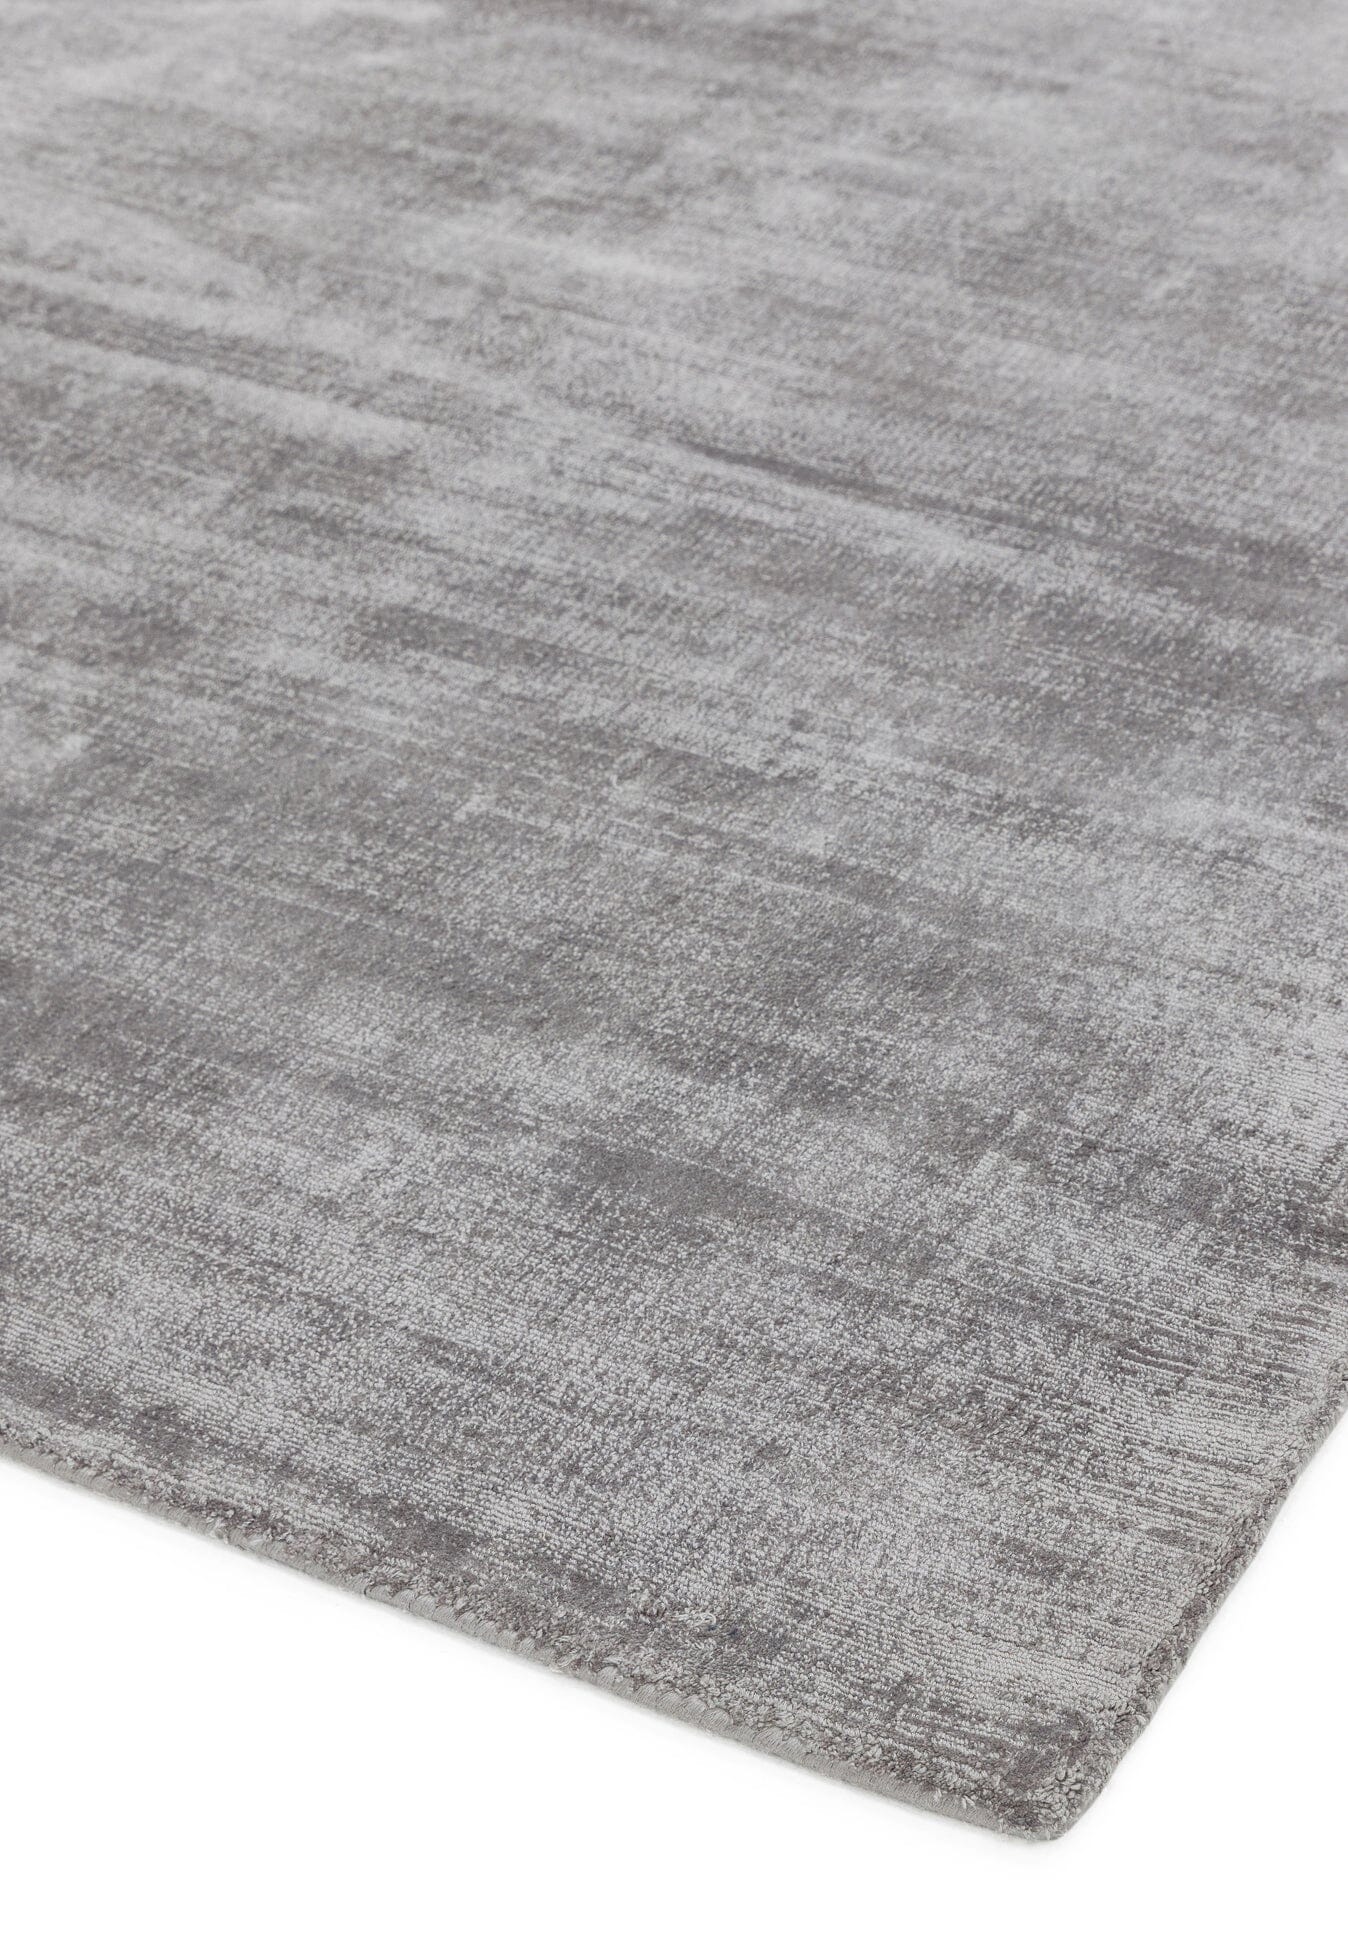  Asiatic Carpets-Asiatic Carpets Blade Hand Woven Rug Silver - 120 x 170cm-Grey, Silver 557 